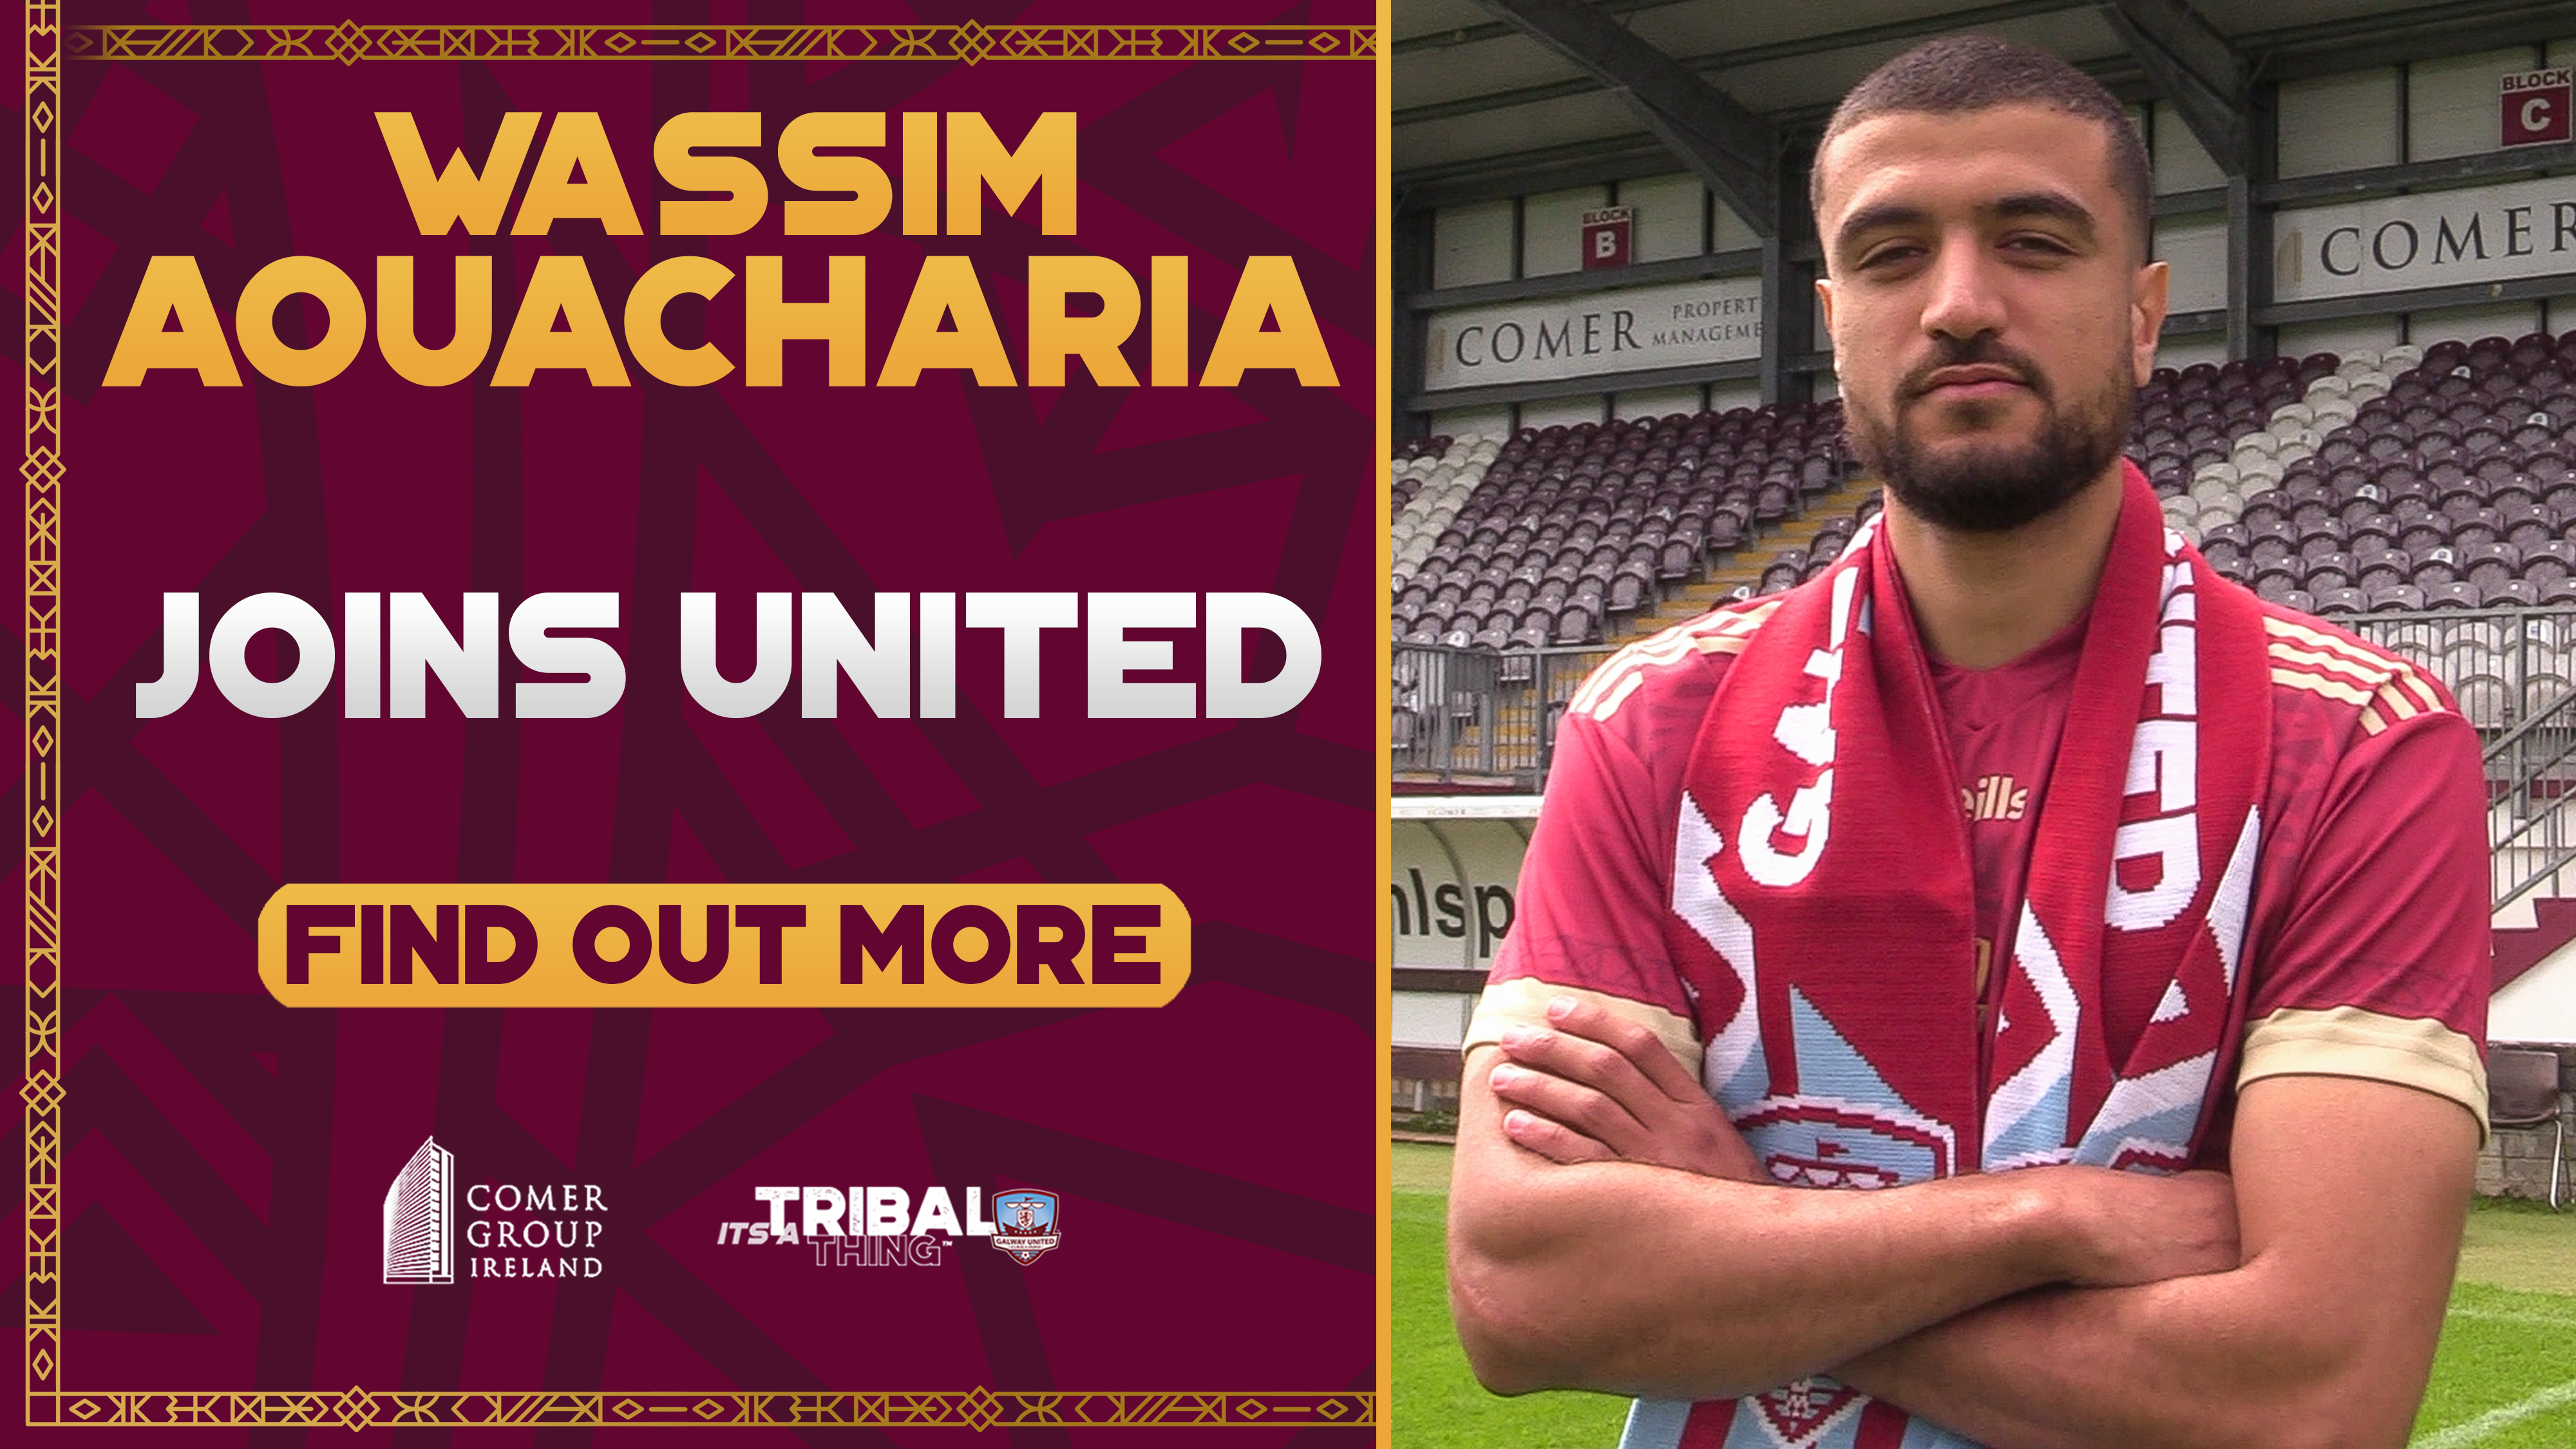 Wassim Aouacharia joins United